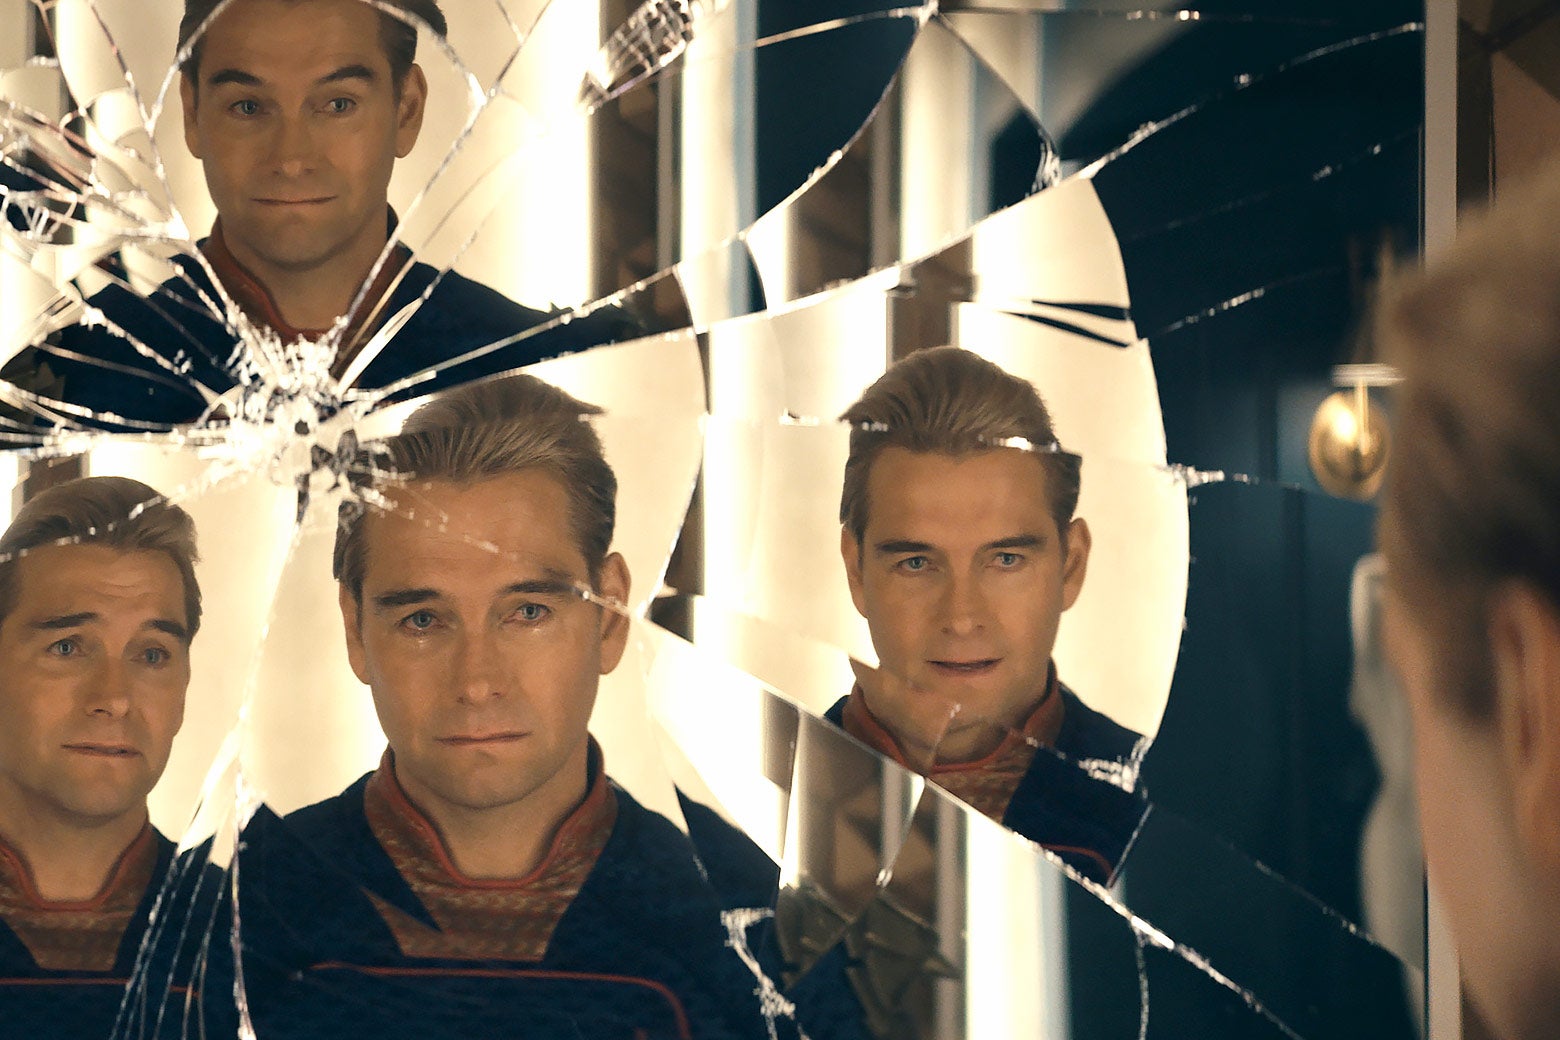 A fractured mirror showing many reflections of Homelander.